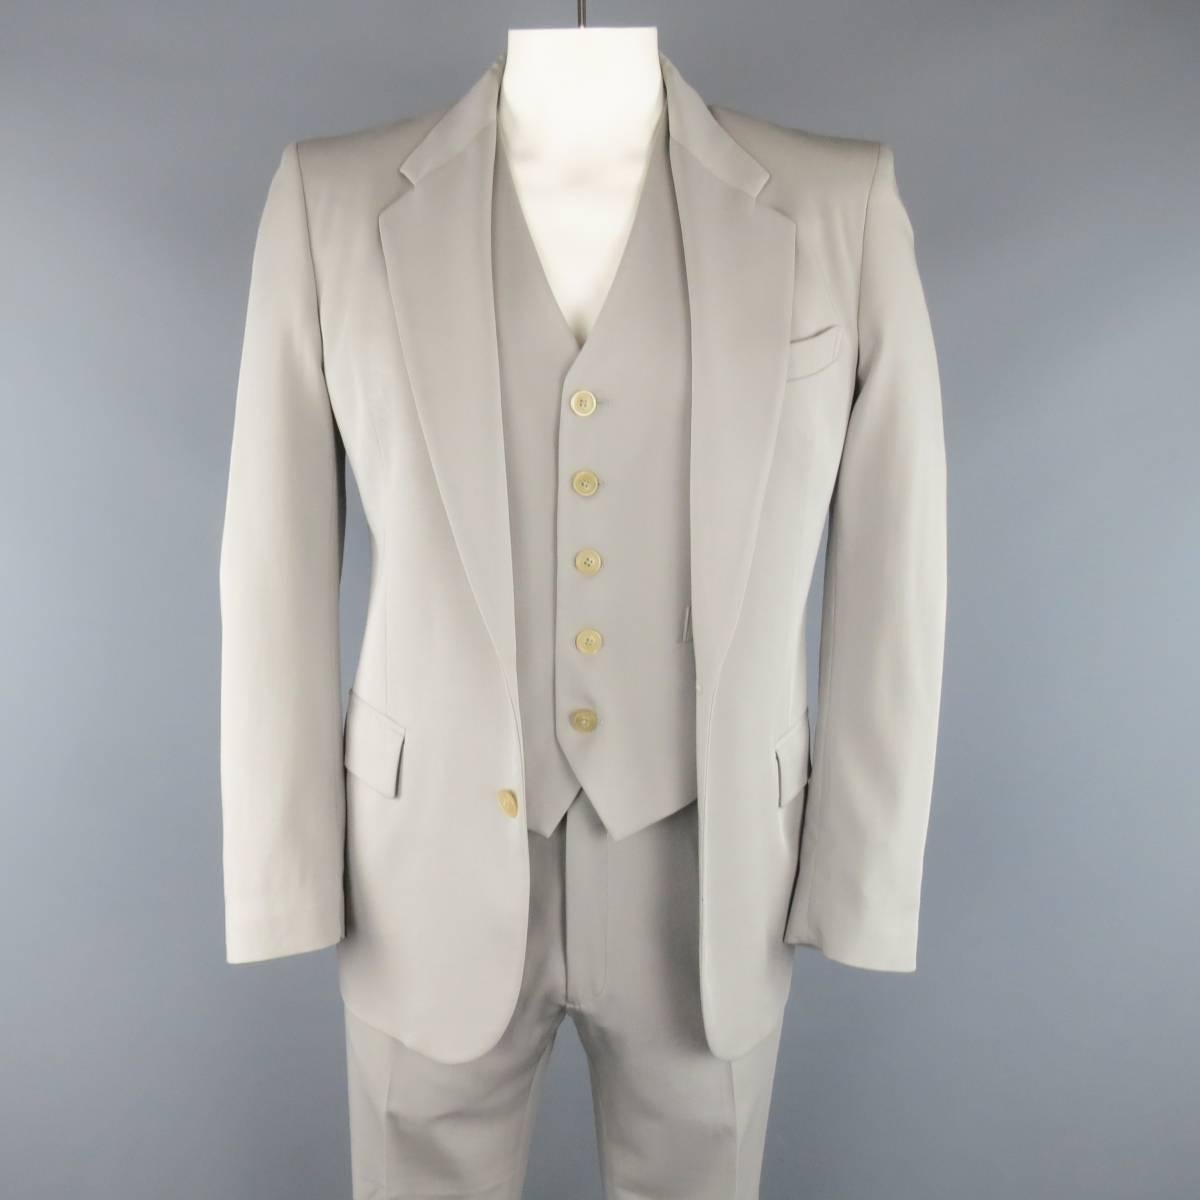 Three piece MAISON MARTIN MARGIELA suit in a light muted gray wool twill includes a two button, notch lapel sport coat with functional button cuff, v neck vest, and matching flat front trousers. Seam coming undone on back. As-Is. Made in Italy.
